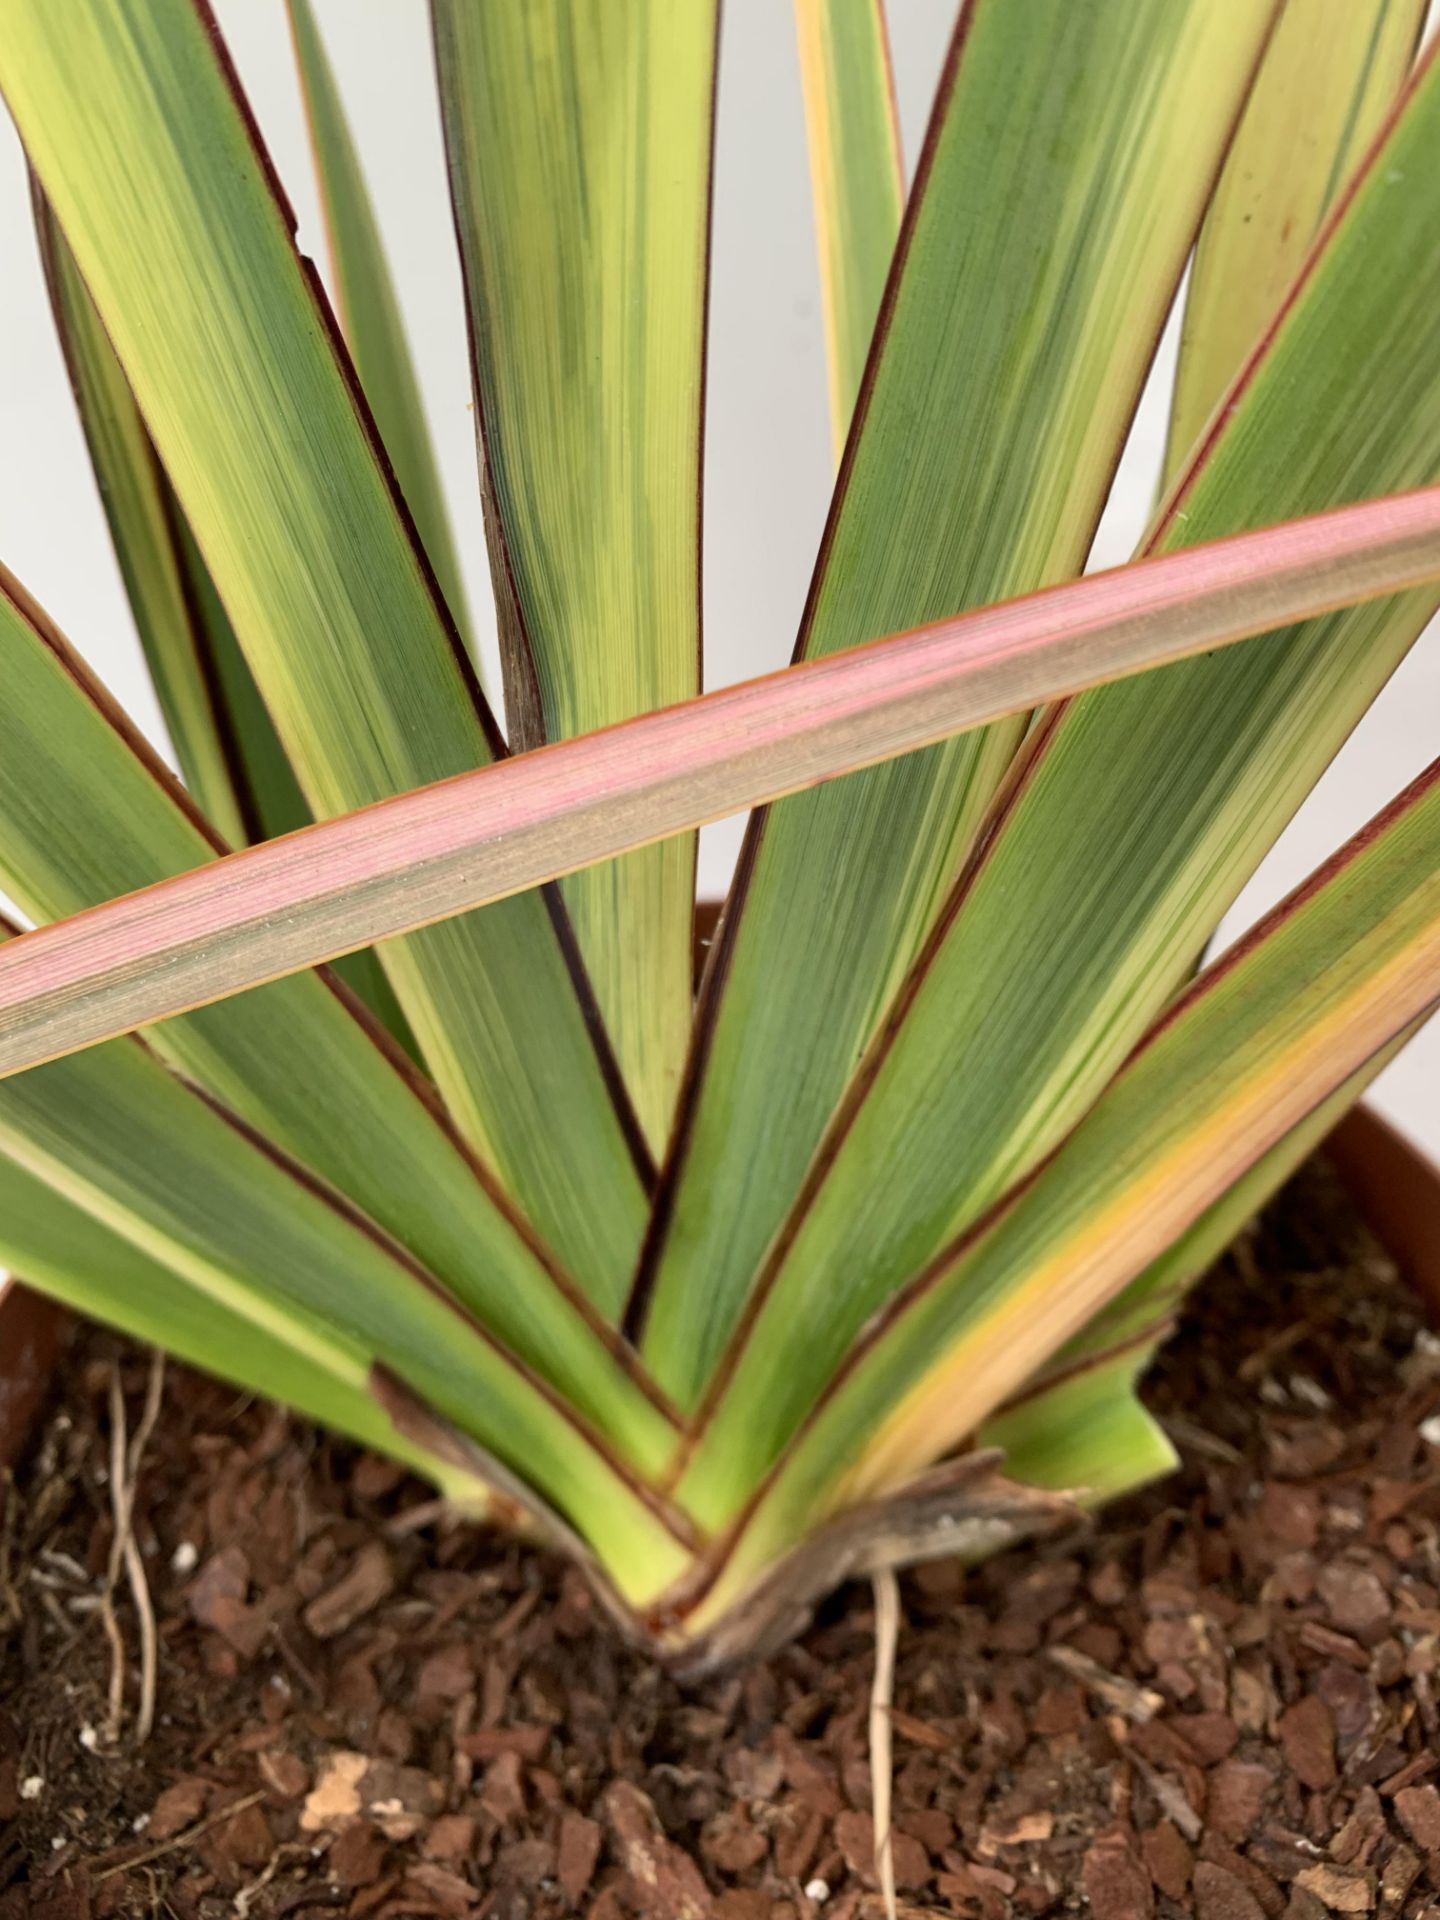 TWO PHORMIUM TENAX 'RAINBOW QUEEN' IN 3 LTR POTS APPROX 1M IN HEIGHT PLUS VAT TO BE SOLD FOR THE TWO - Image 5 of 12